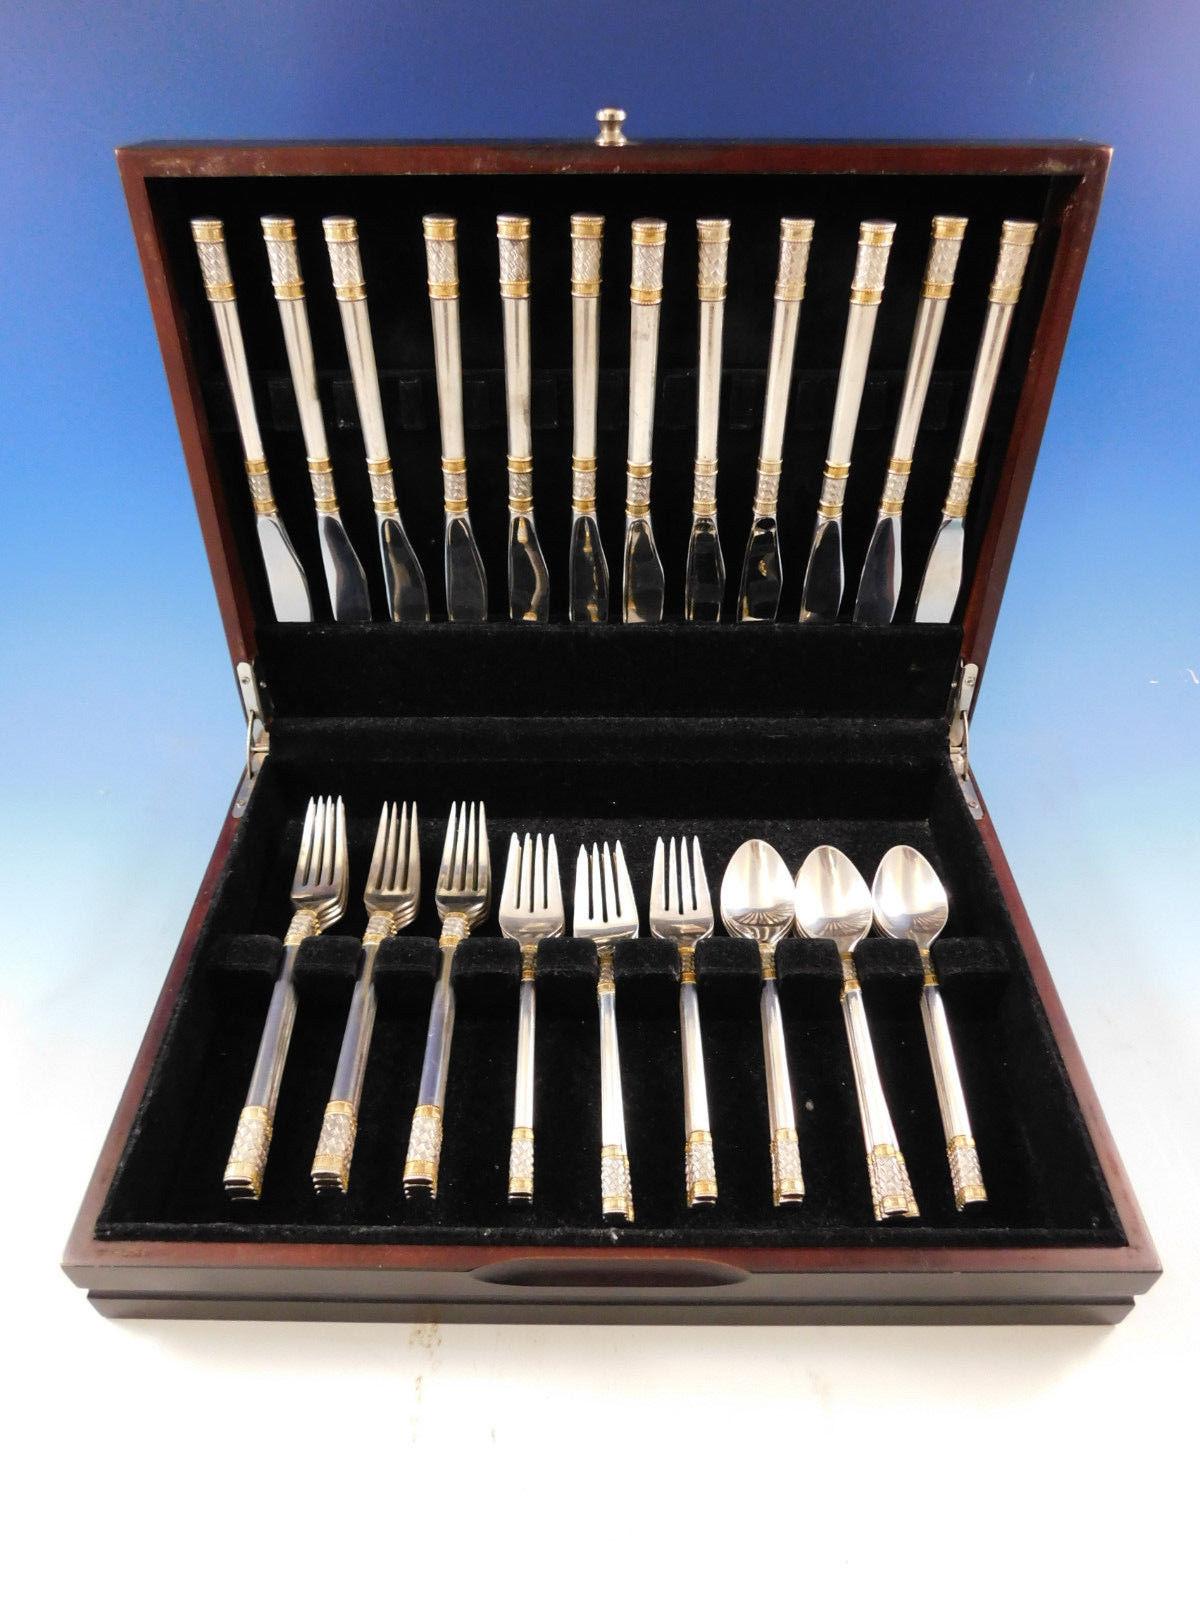 Aegean weave gold accent by Wallace sterling silver flatware set, 48 pieces. This set includes:

12 knives, 9 3/8